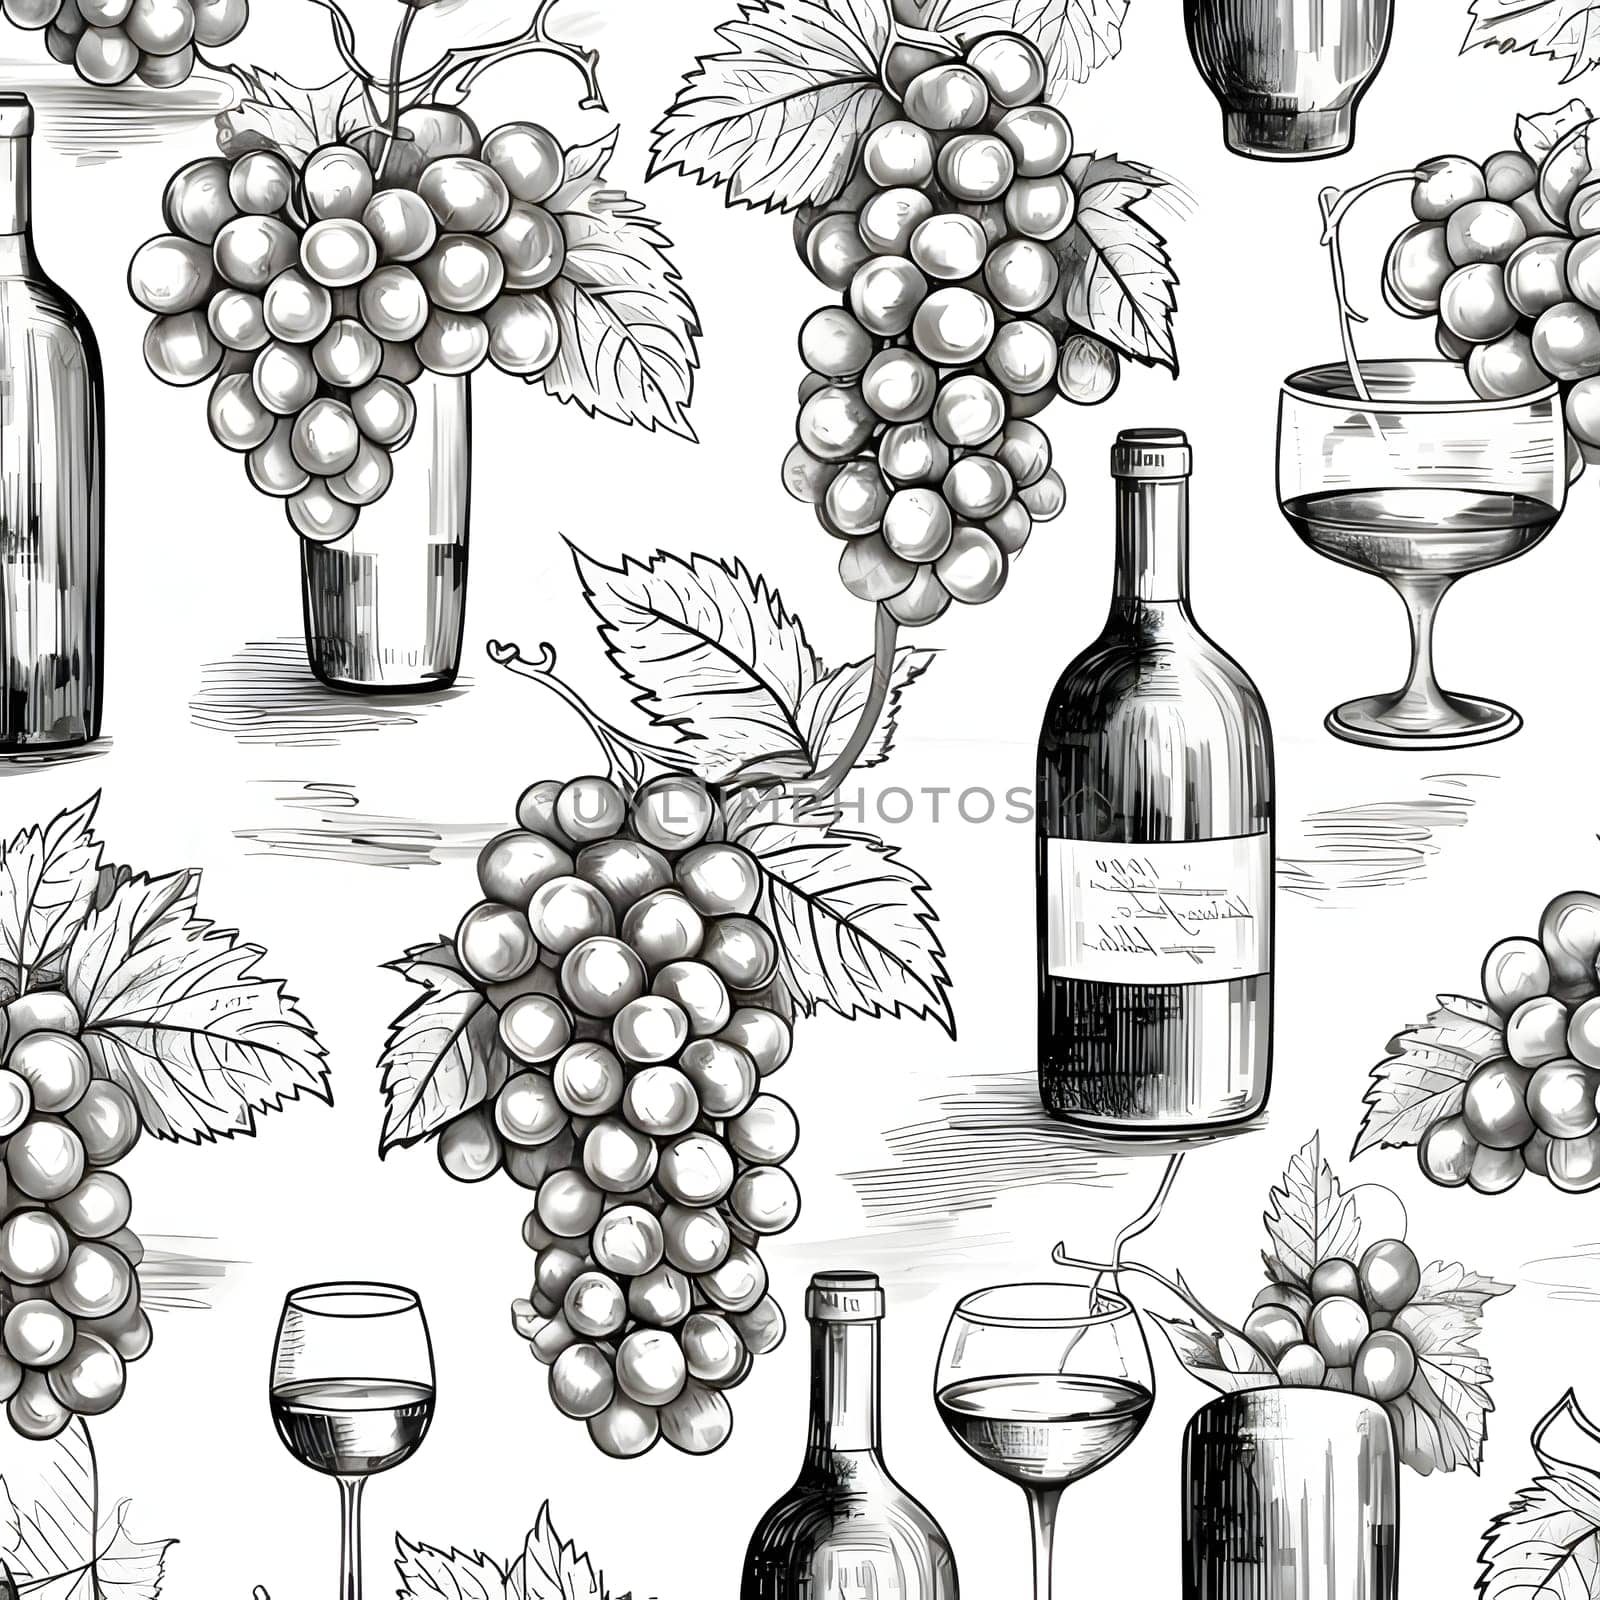 Patterns and banners backgrounds: Seamless pattern with hand drawn grapes and wine bottles. Vector illustration.